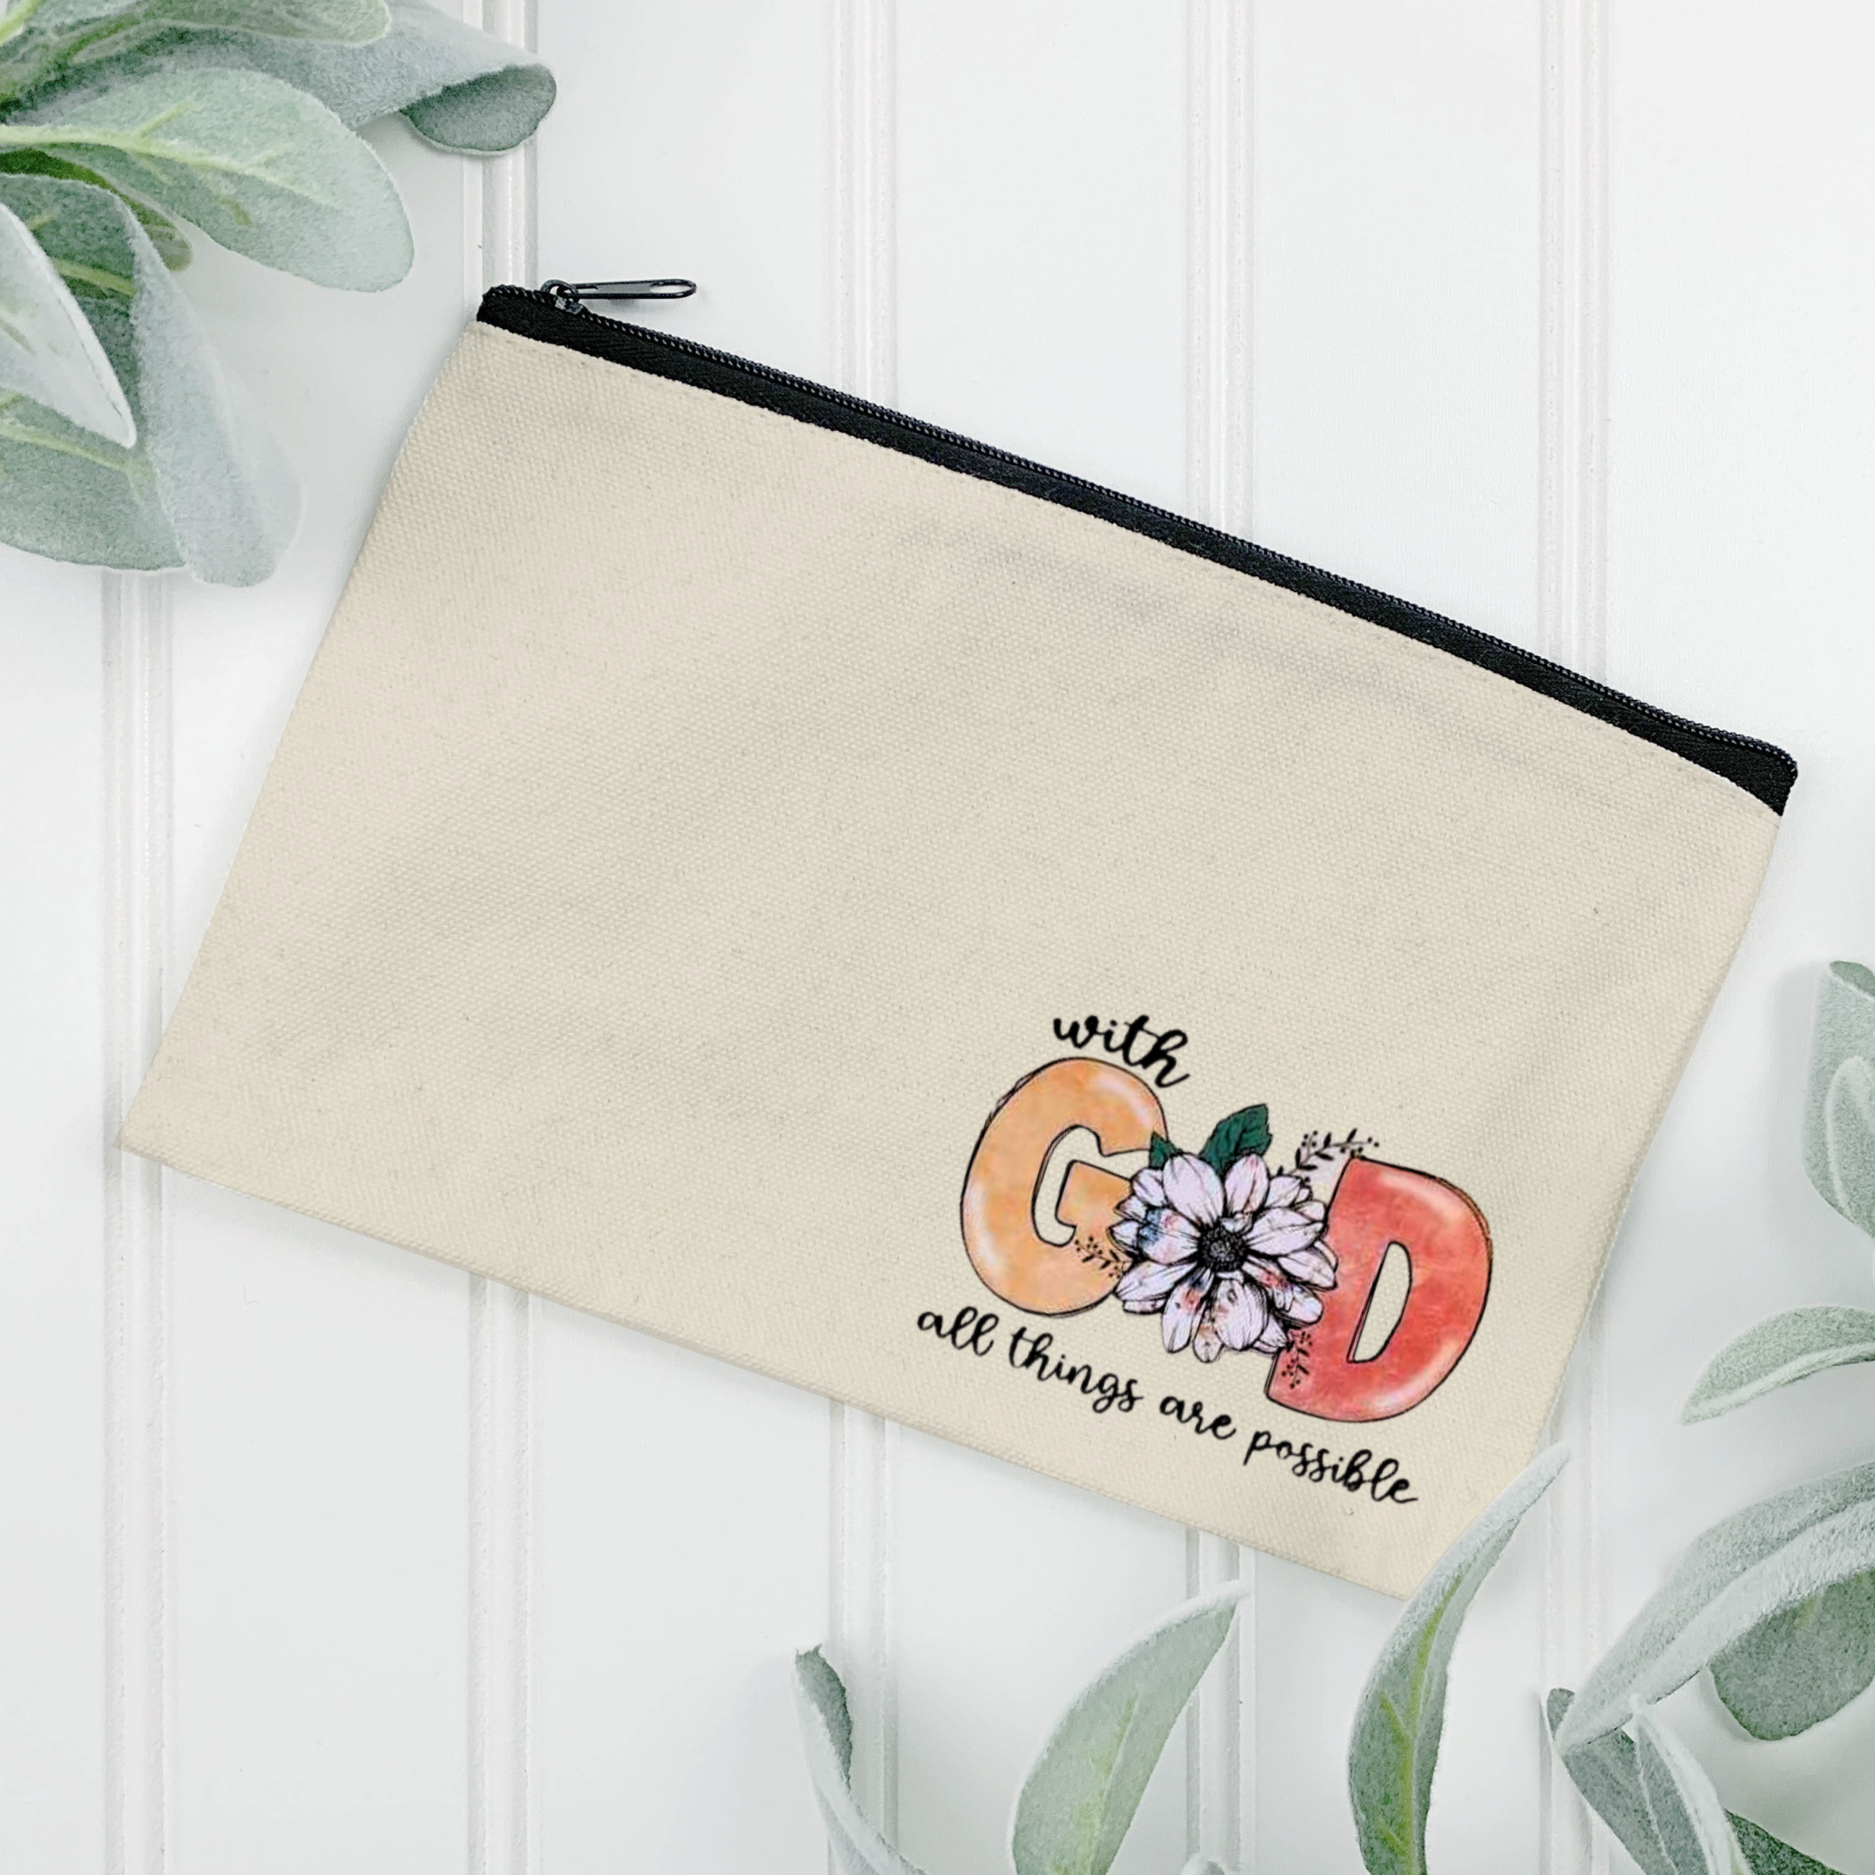 With God All Things Are Possible  Canvas Zipper Pouch – Scripture And Grace